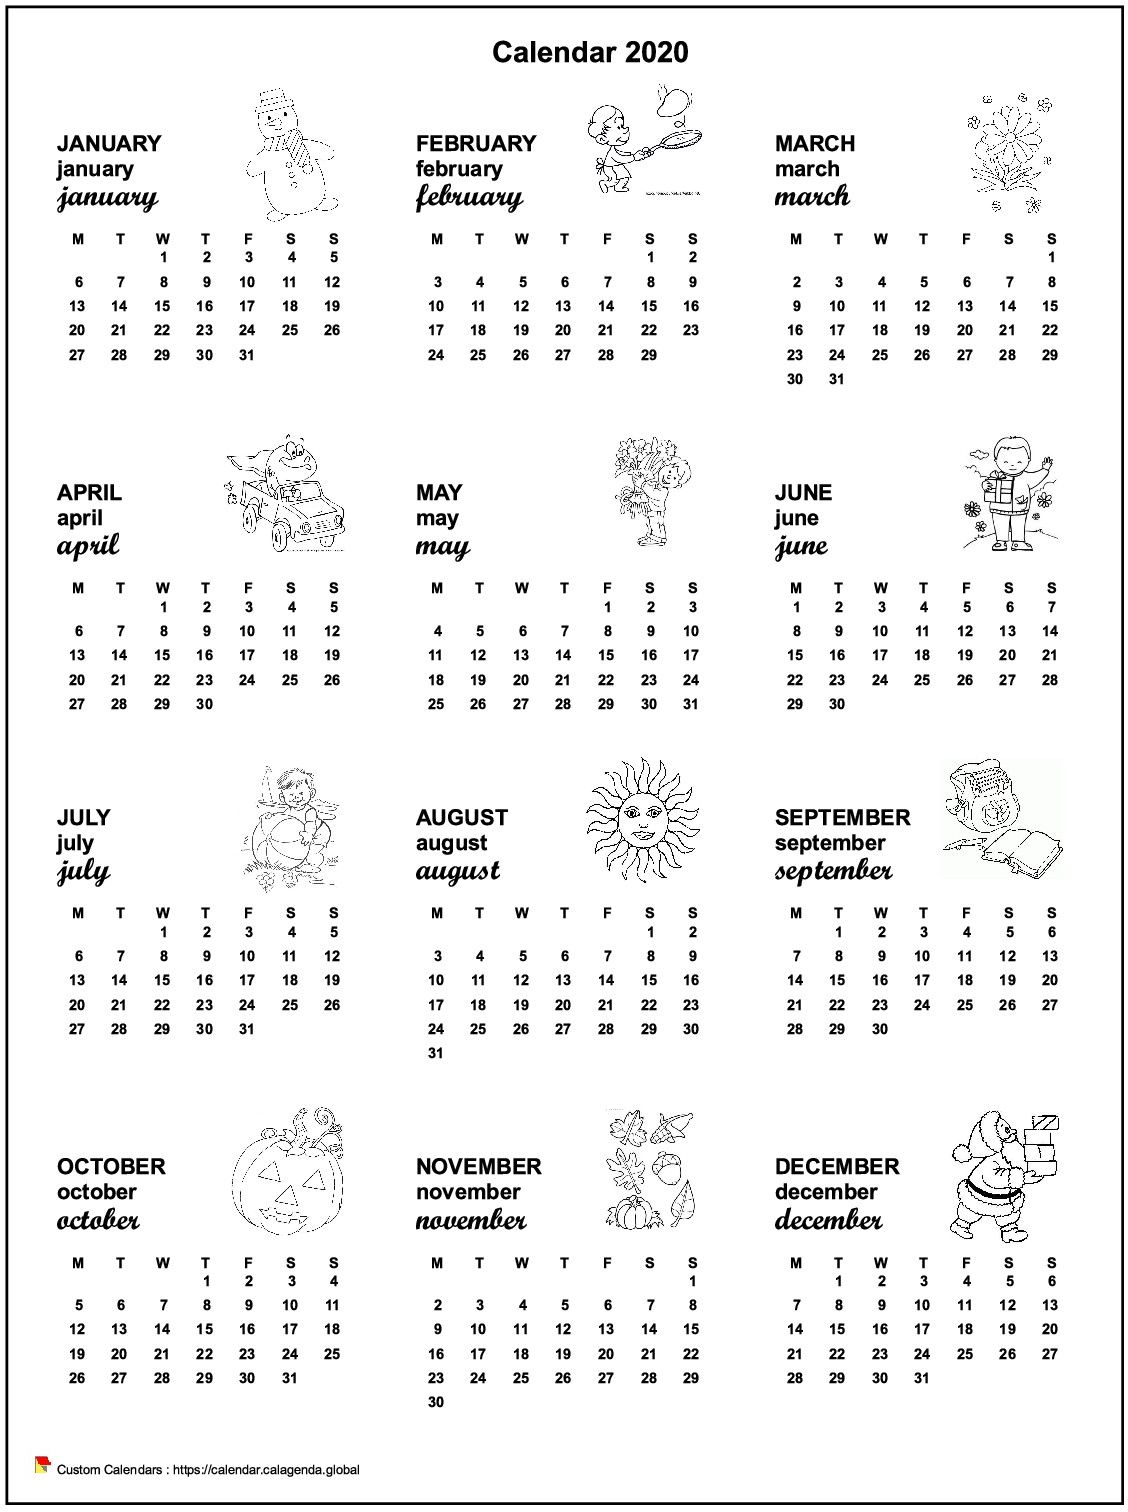 Calendar 2050 annual maternal and primary school